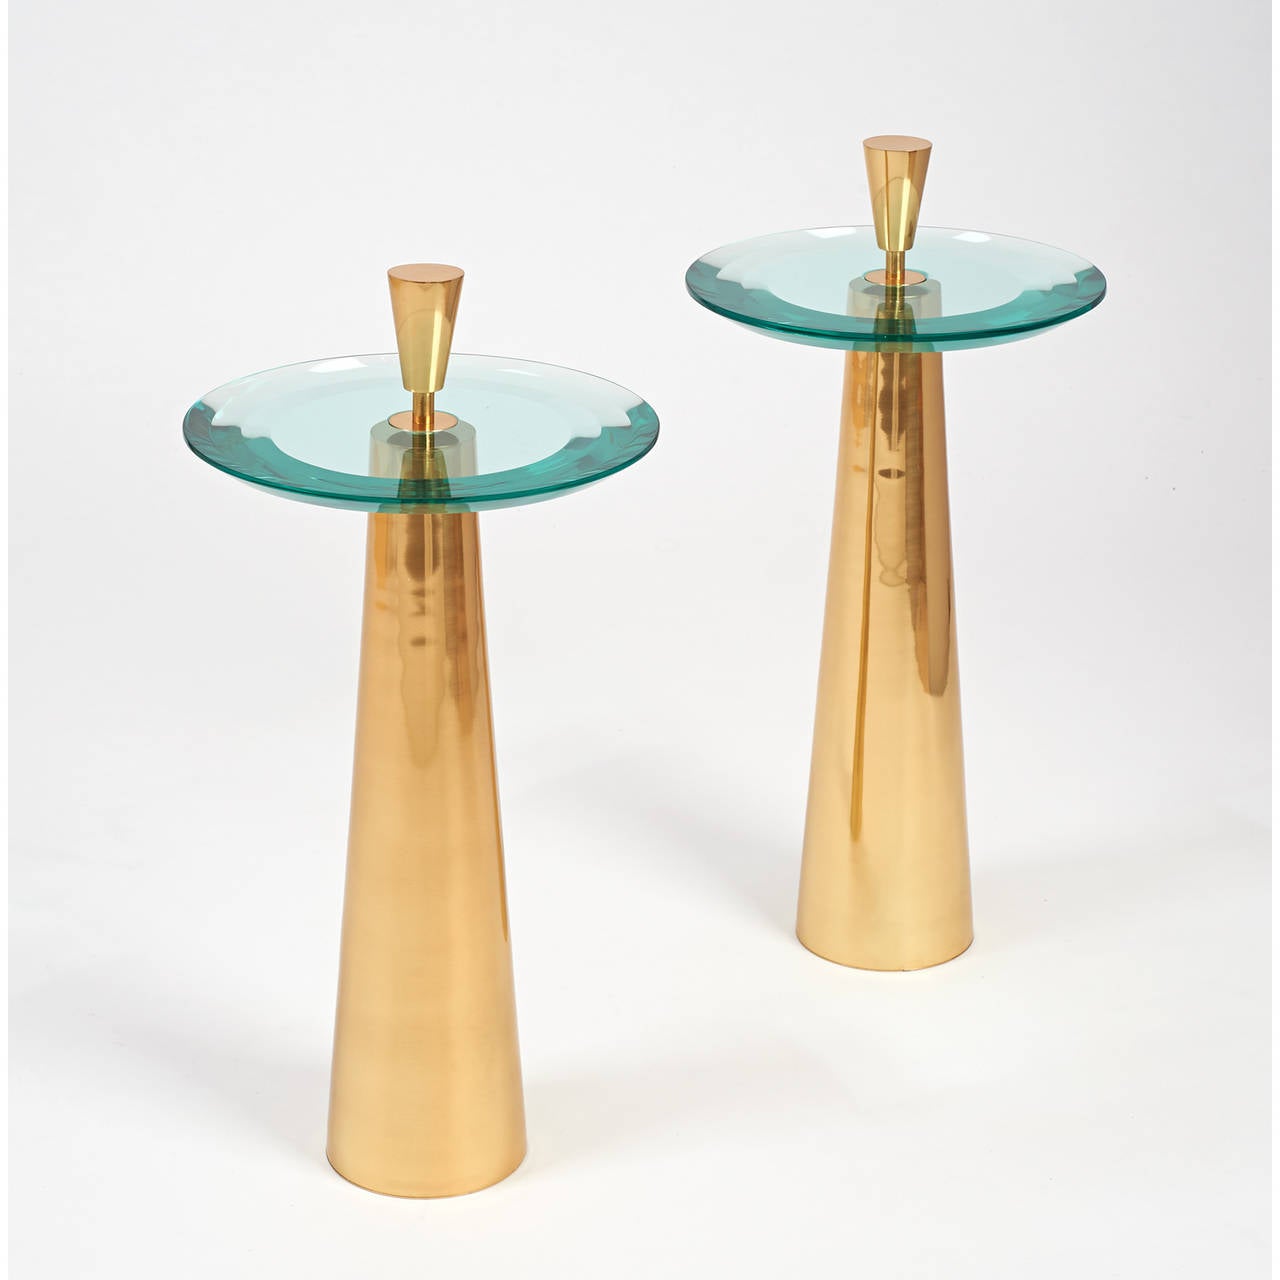 Roberto Rida (b. 1943).

A sculptural pair of side tables.
Triple beveled glass, polished tapered bronze base.
Signed,
Italy, 2014.

Limited edition, exclusive to L'Art de Vivre.

Measures: 13.5 Ø x 23 H at glass.

Two pair available.